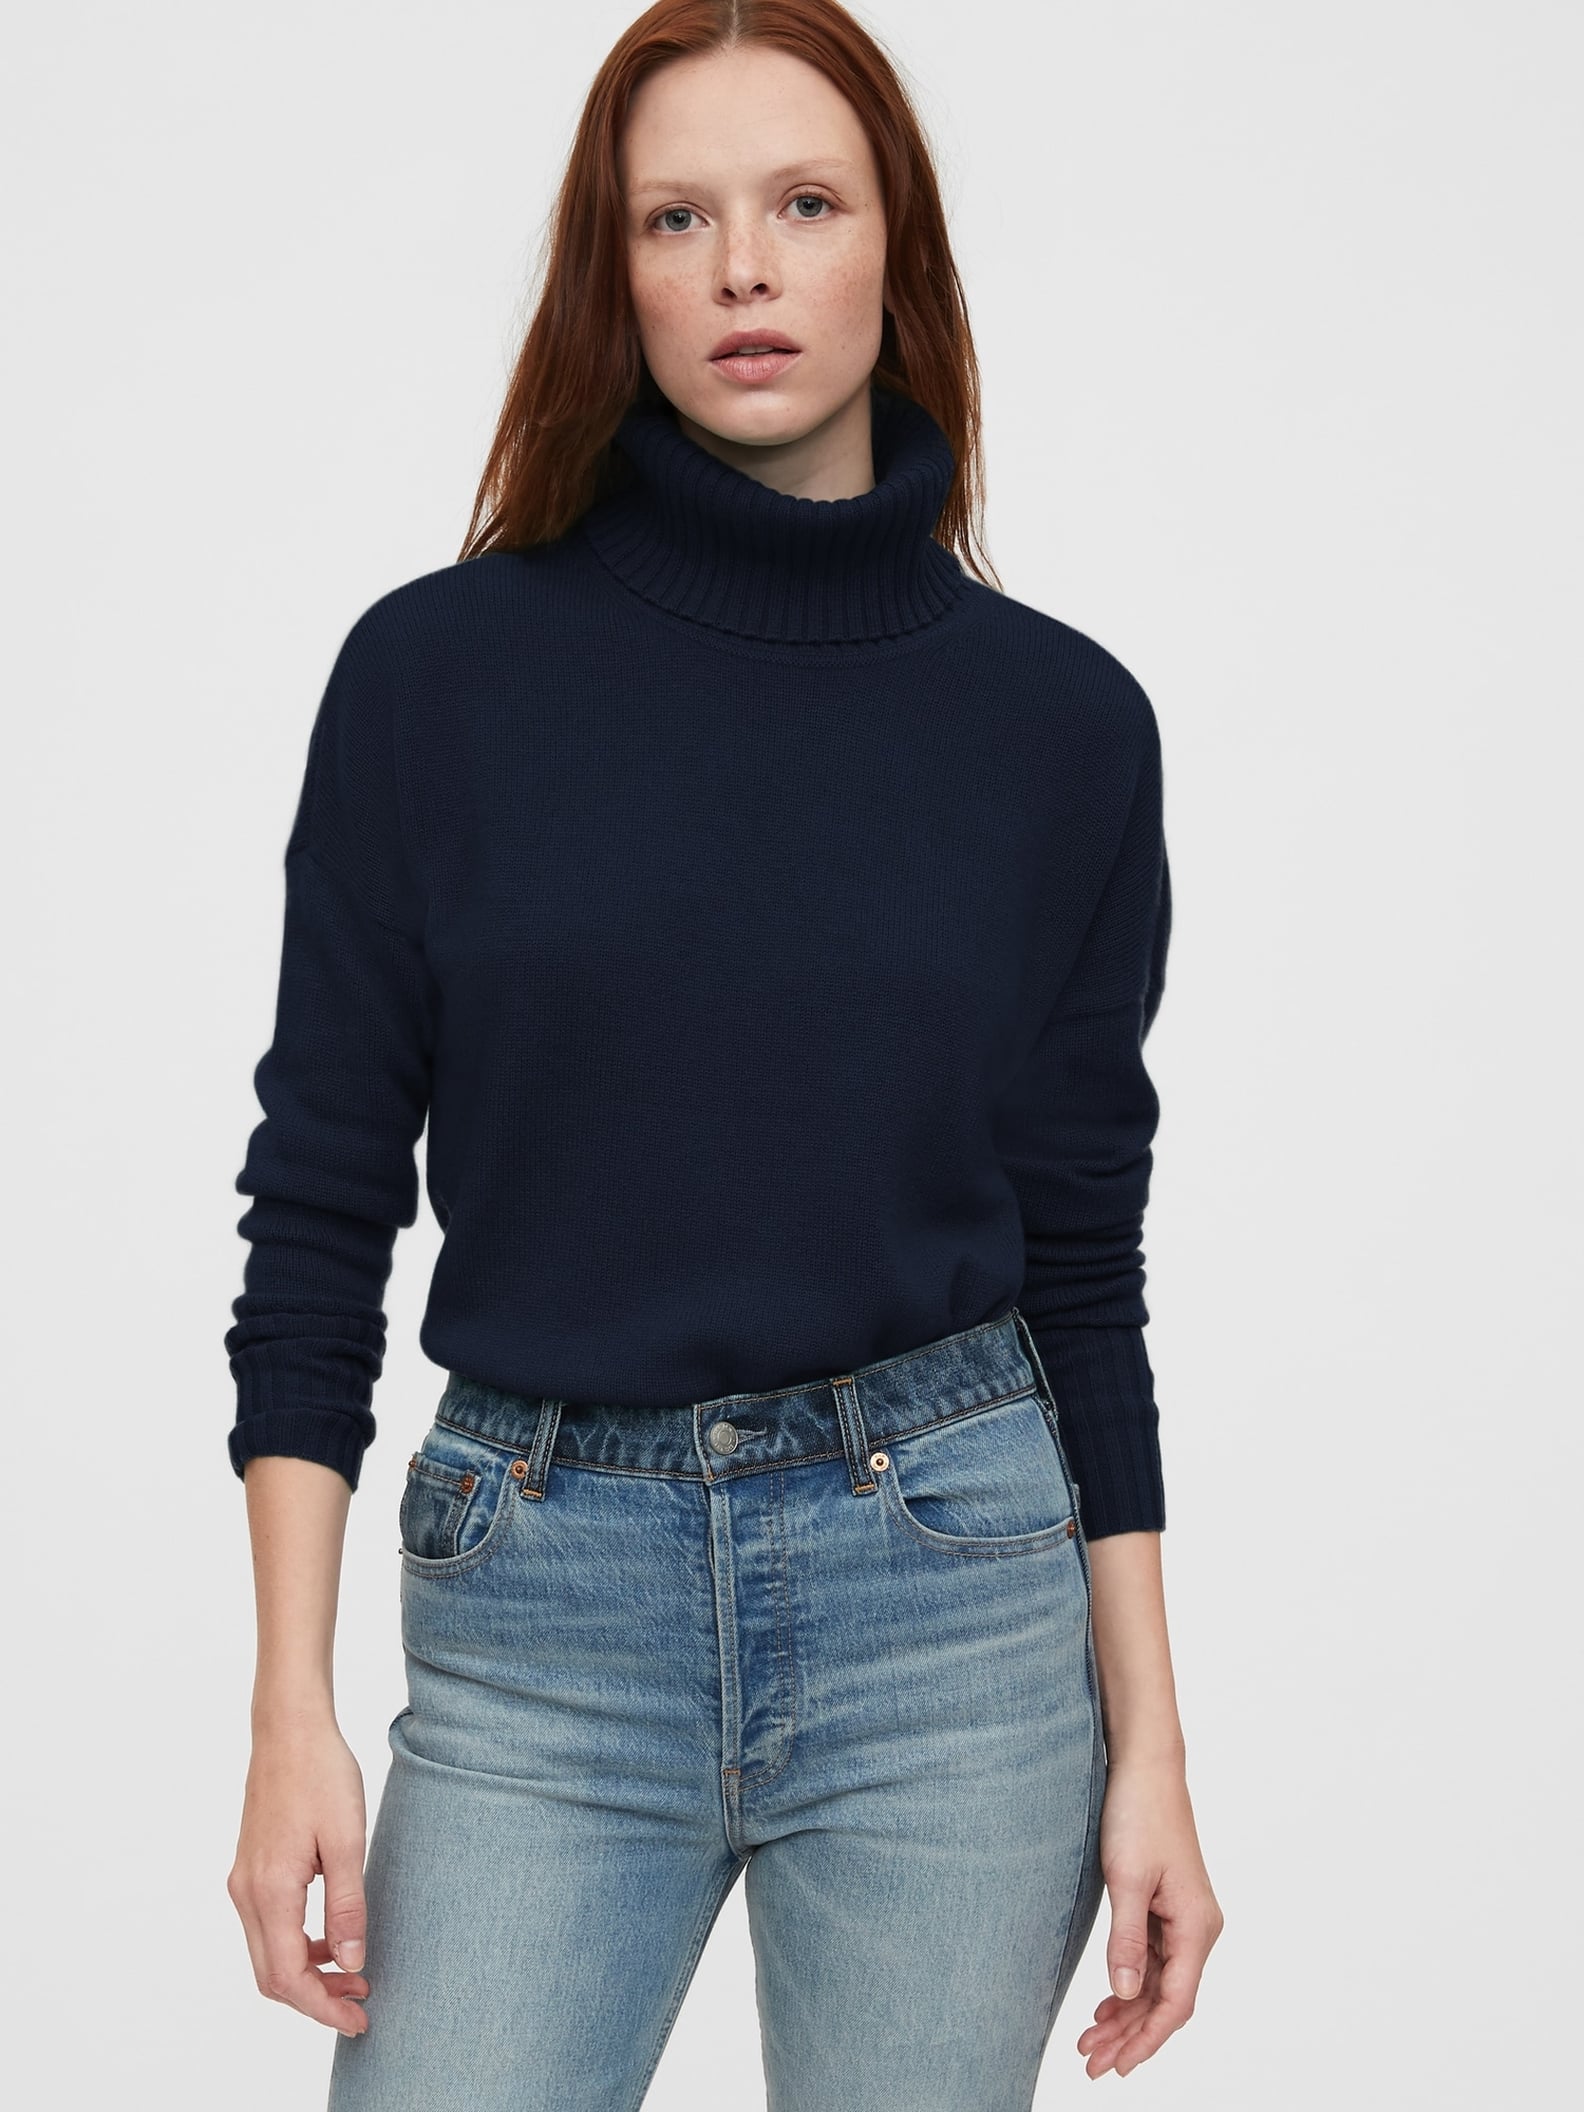 Best Cozy Sweaters From Gap and Banana Republic | Review | POPSUGAR Fashion